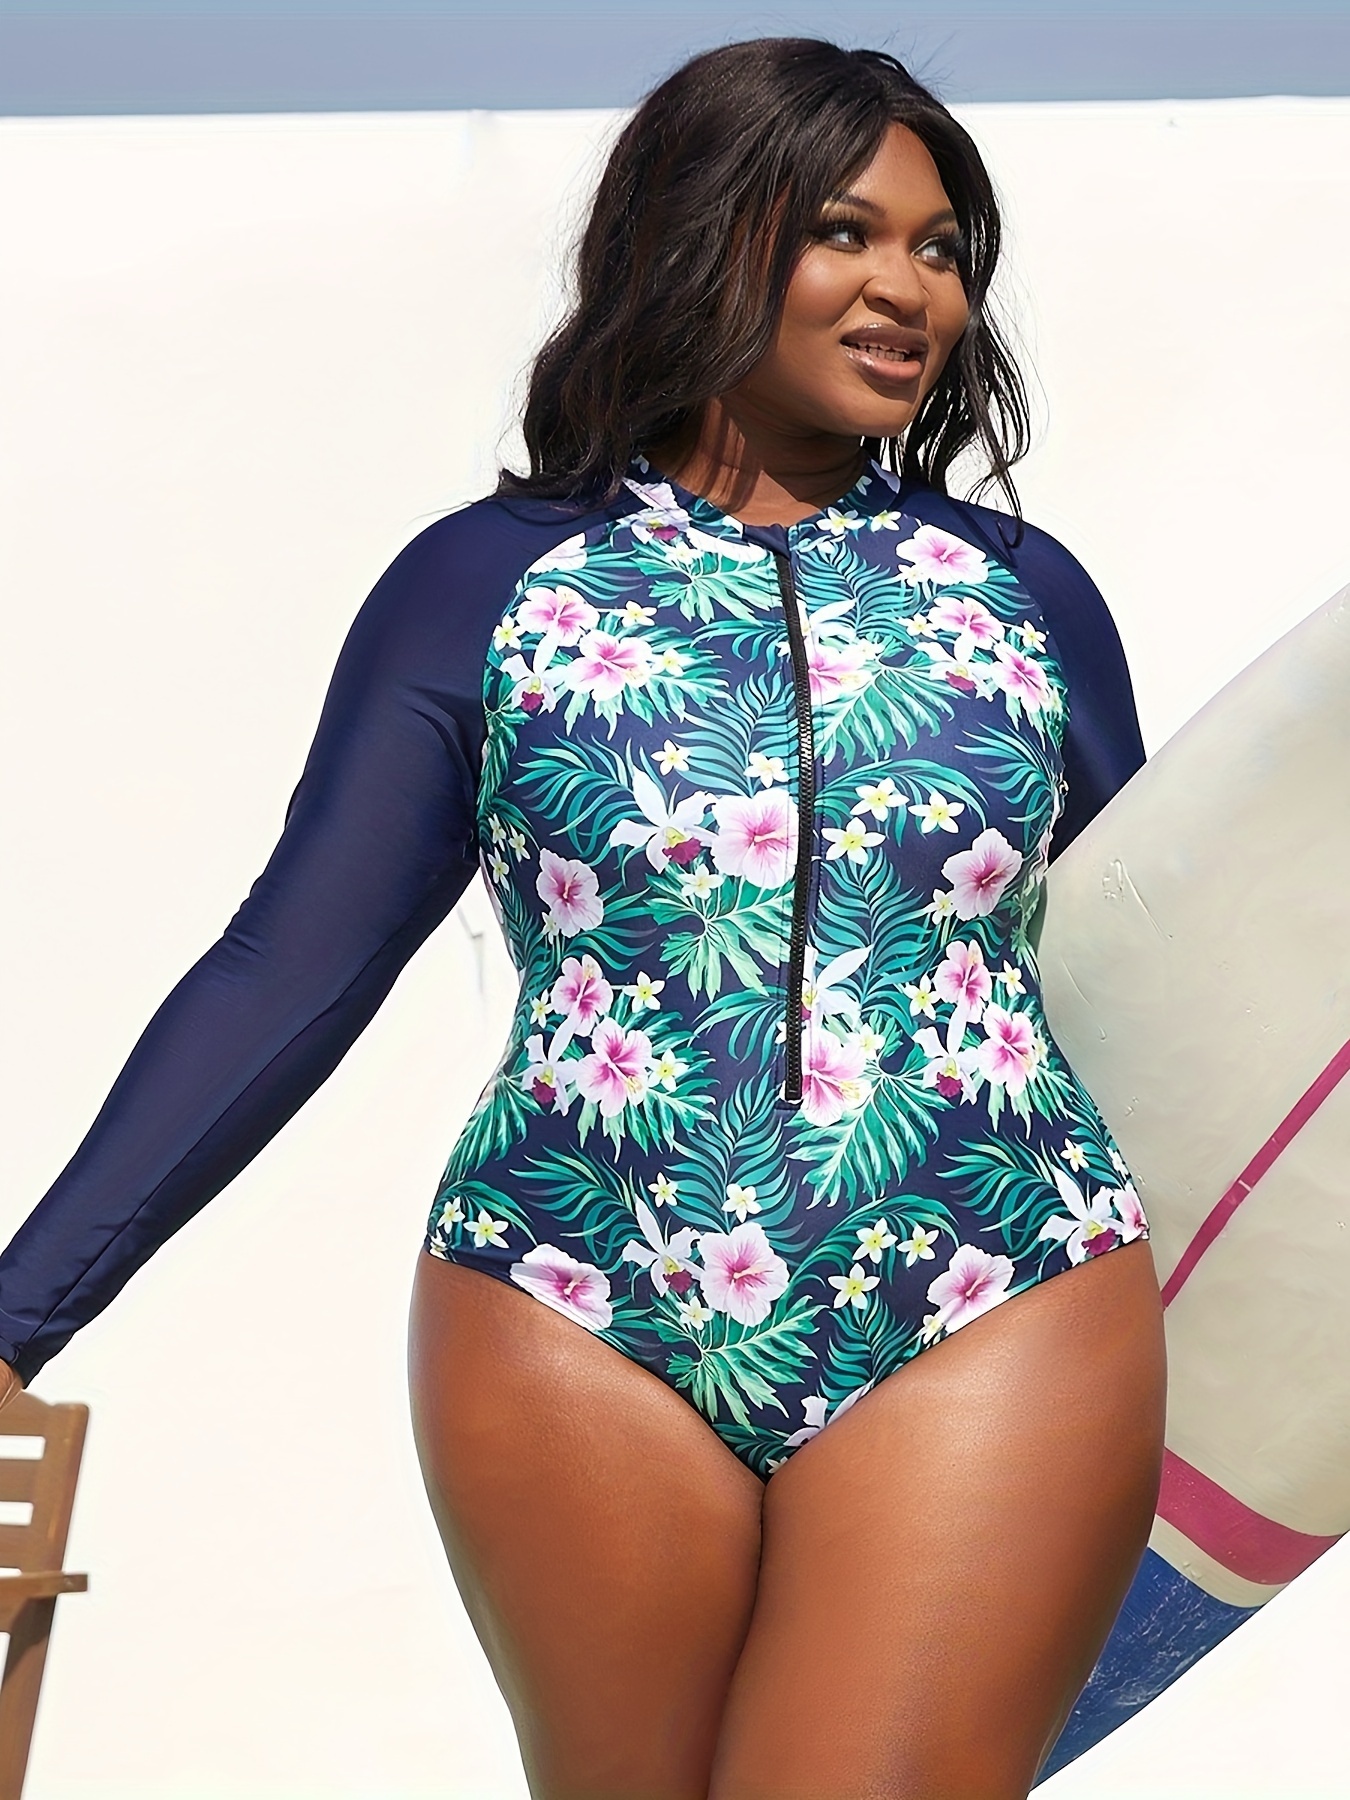 Long Sleeve 2 Piece Swimsuit Bathing Suit Surfing swimsuits for